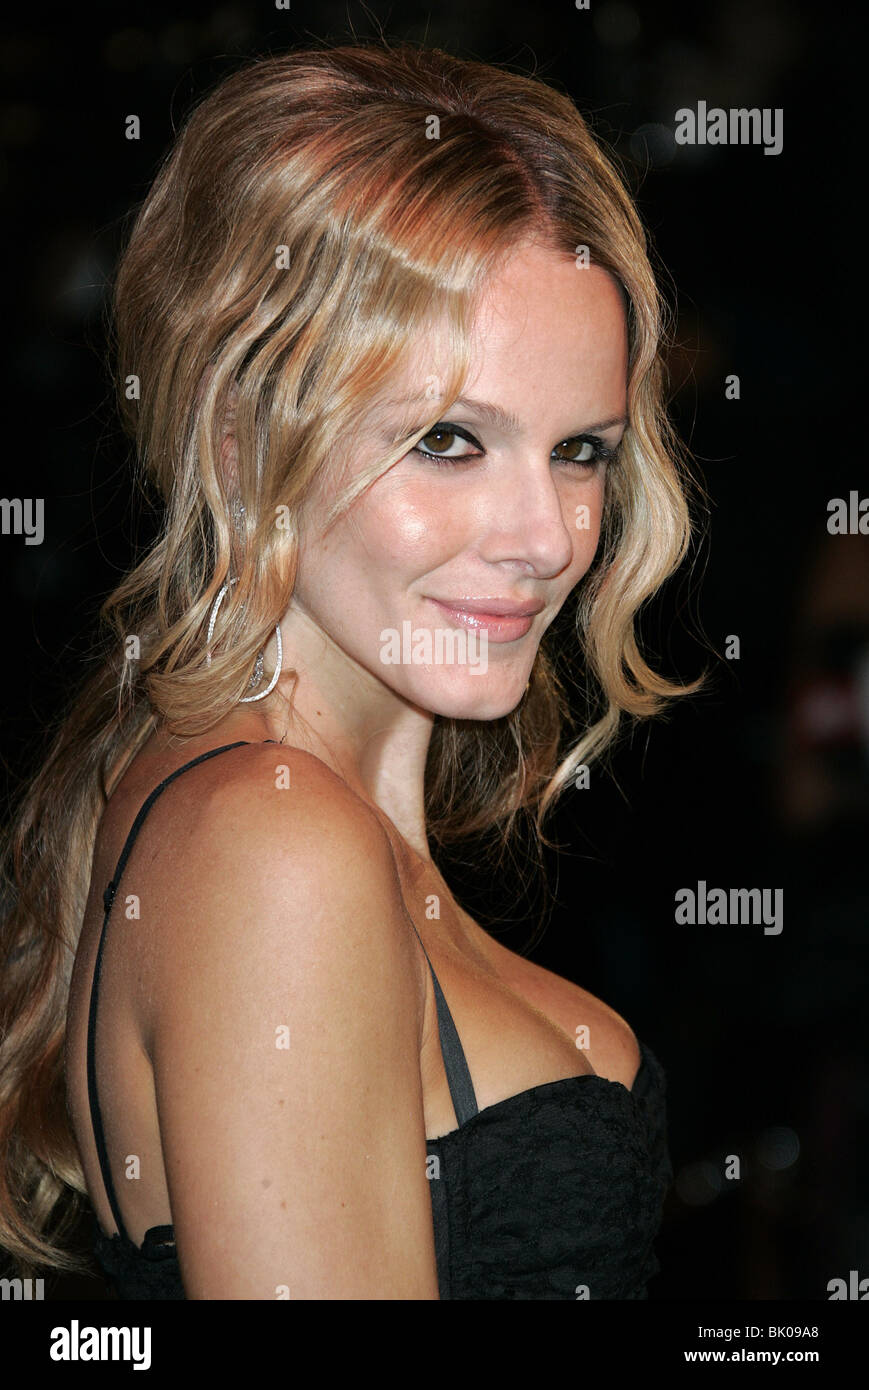 MONET MAZUR VANITY FAIR PARTY 2006 MORTONS WEST HOLLYWOOD LOS ANGELES USA 05 March 2006 Stock Photo